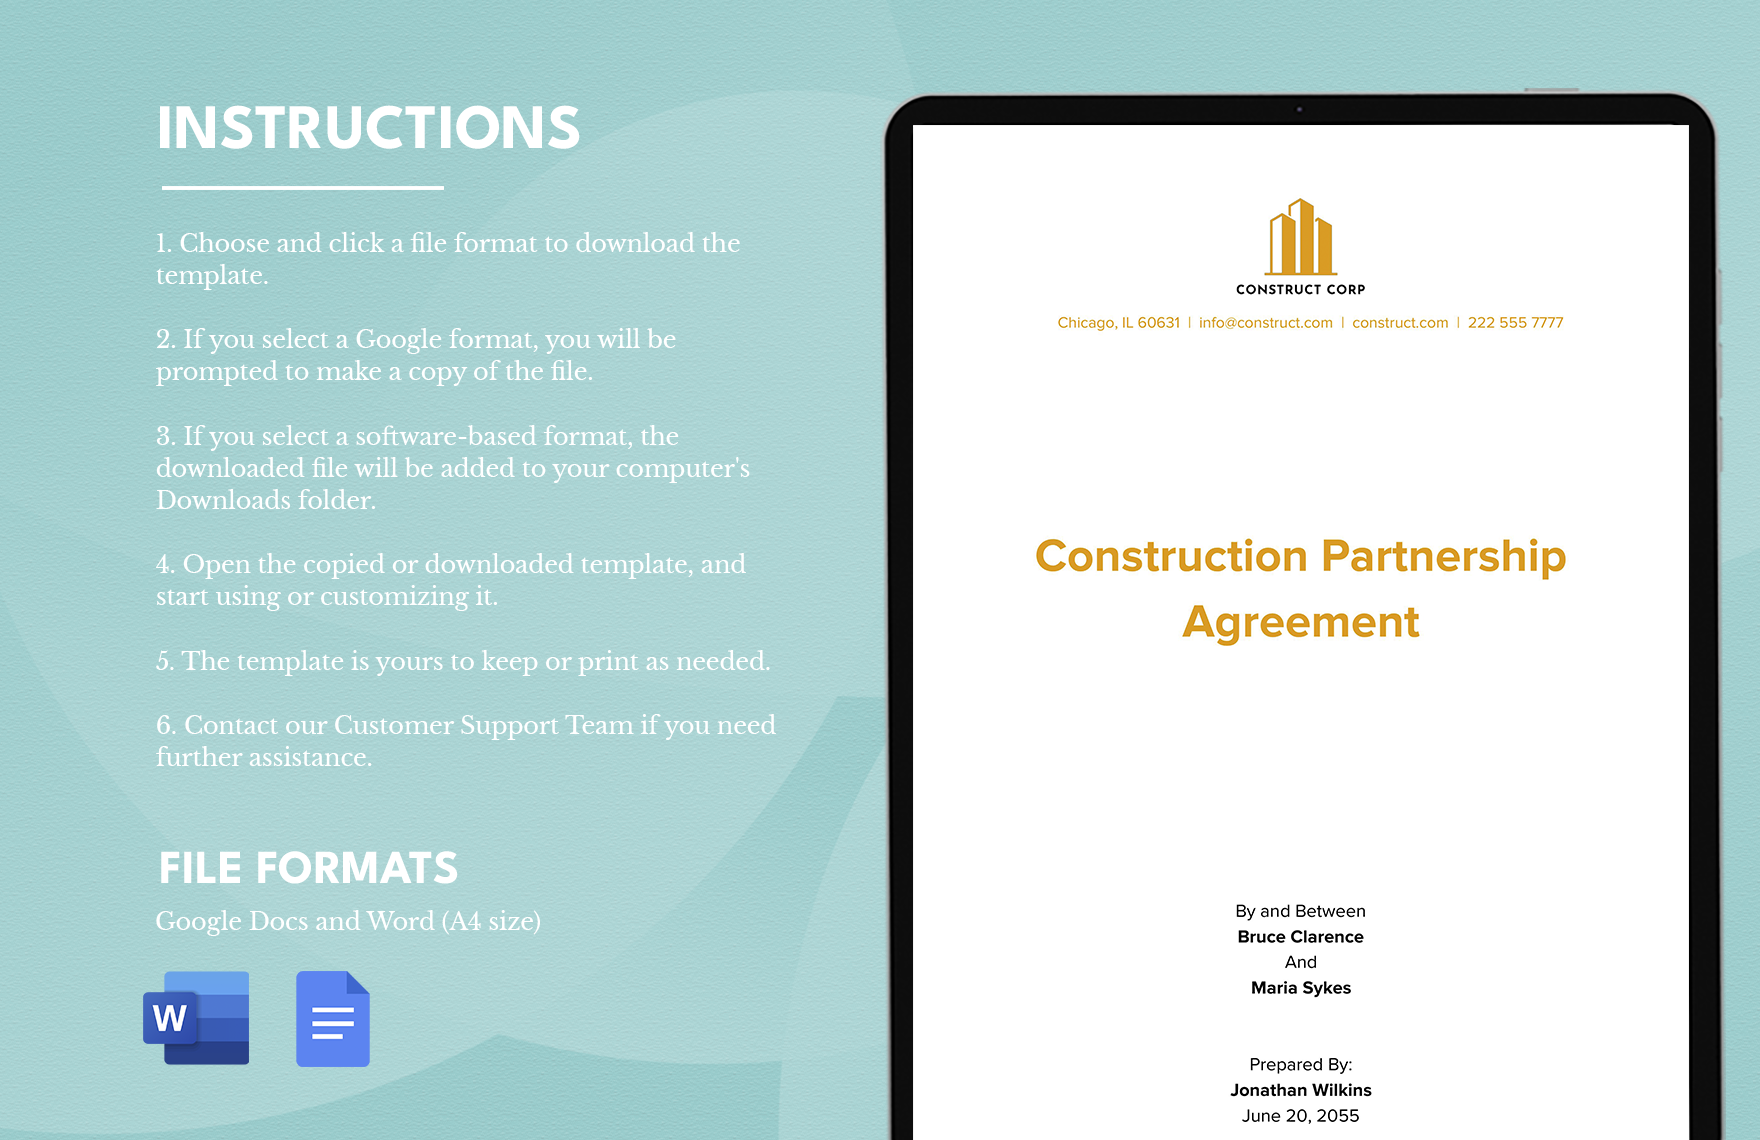 Construction Business Plan Guidelines